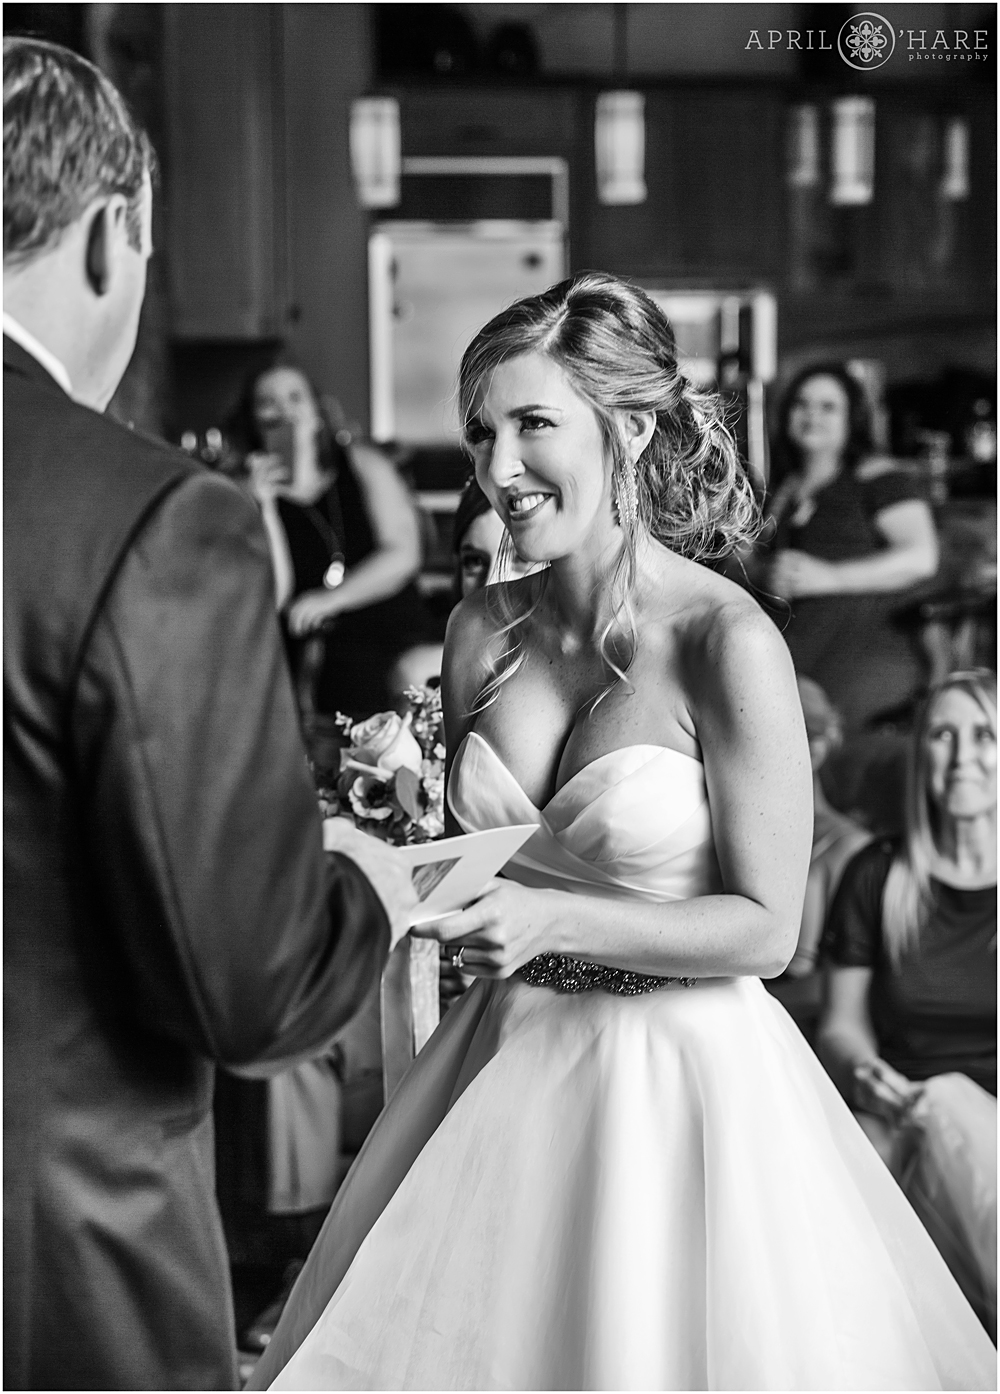 B&W wedding photography of intimate wedding vows in CO